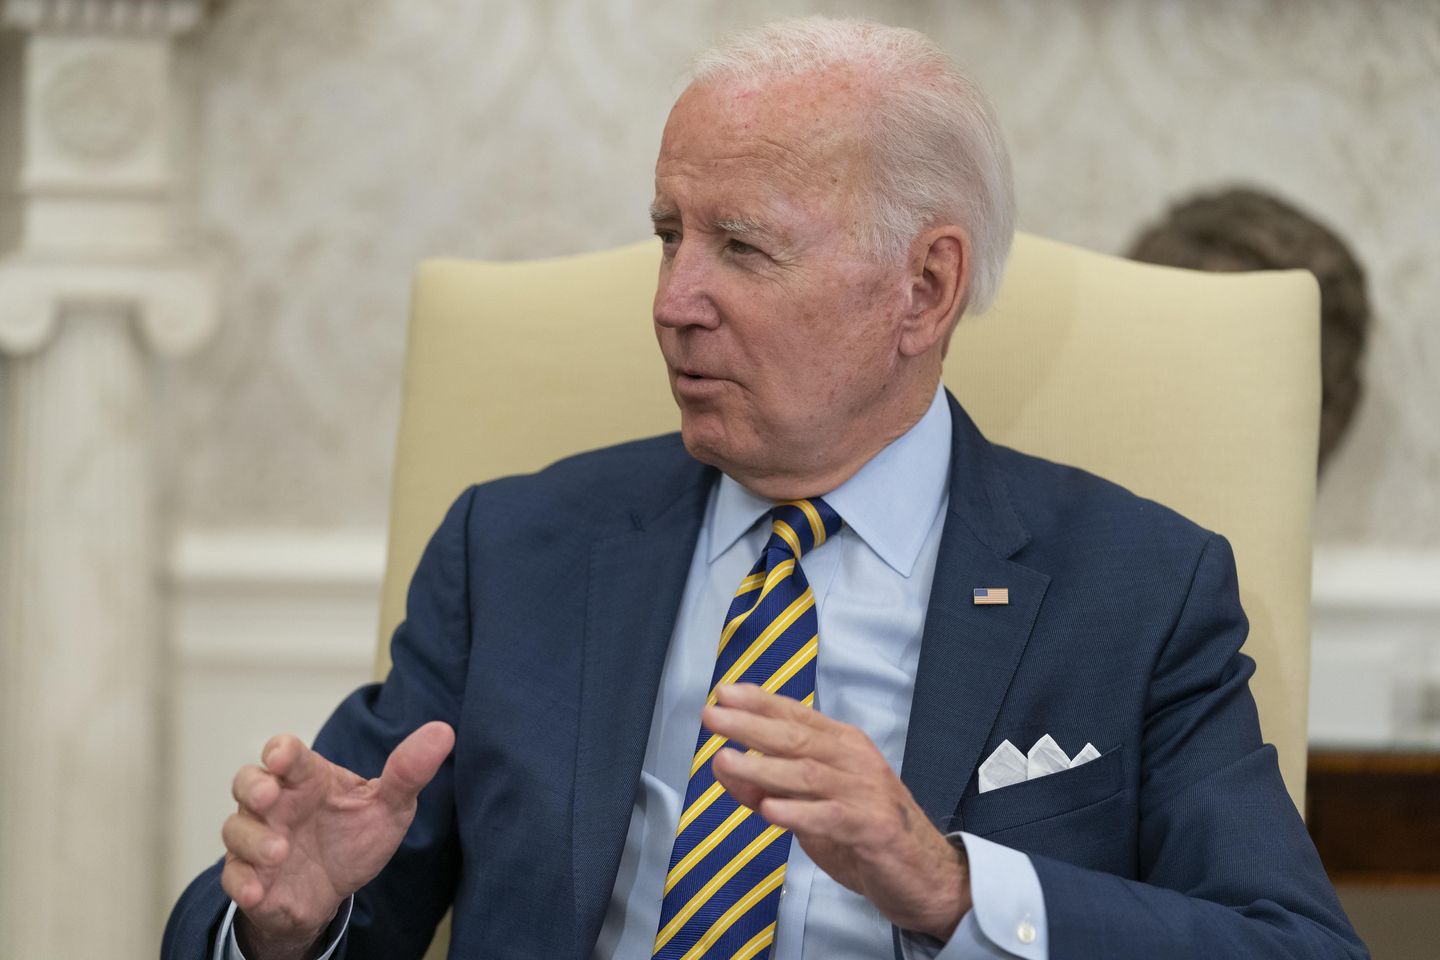 Biden in '60 Minutes' interview says classified documents seized from Mar-a-Lago raise concerns